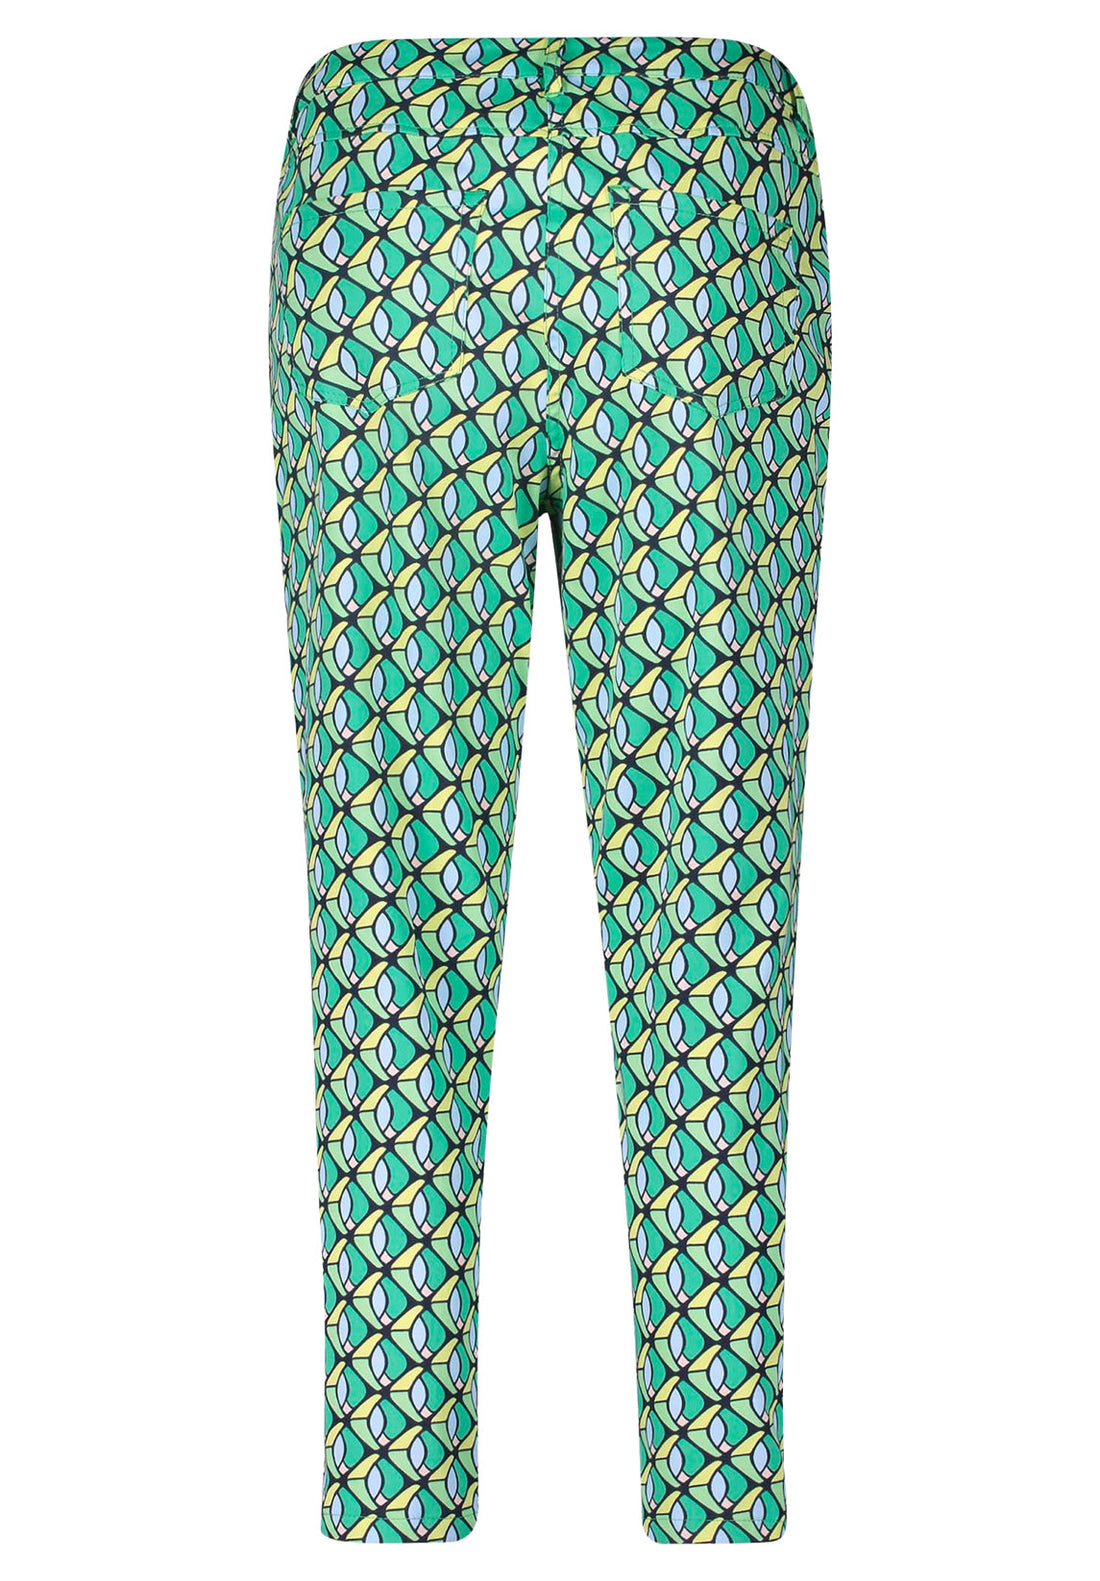 Patterned Slim Fit Chino Trousers_6889 2498_5880_02